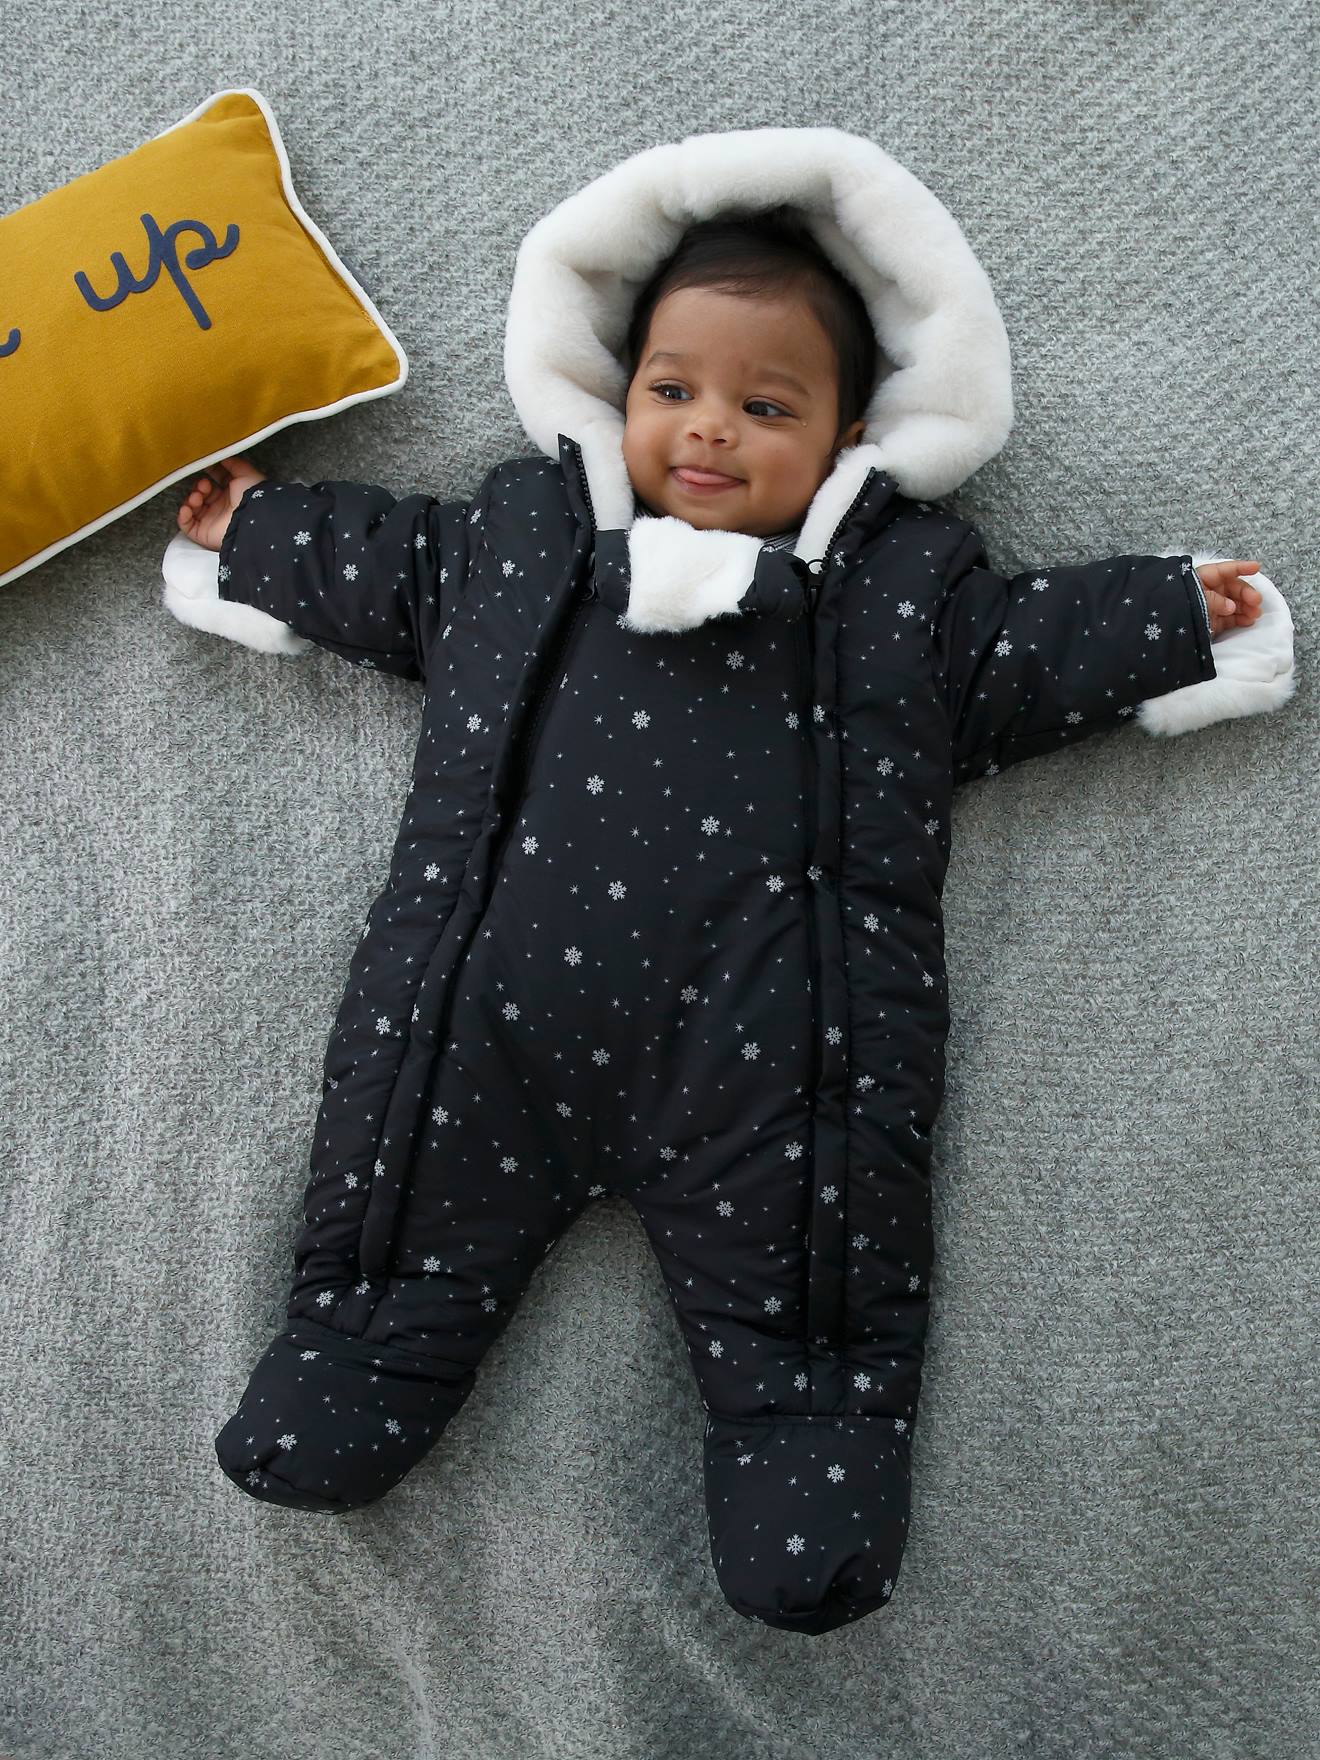 baby in a snowsuit